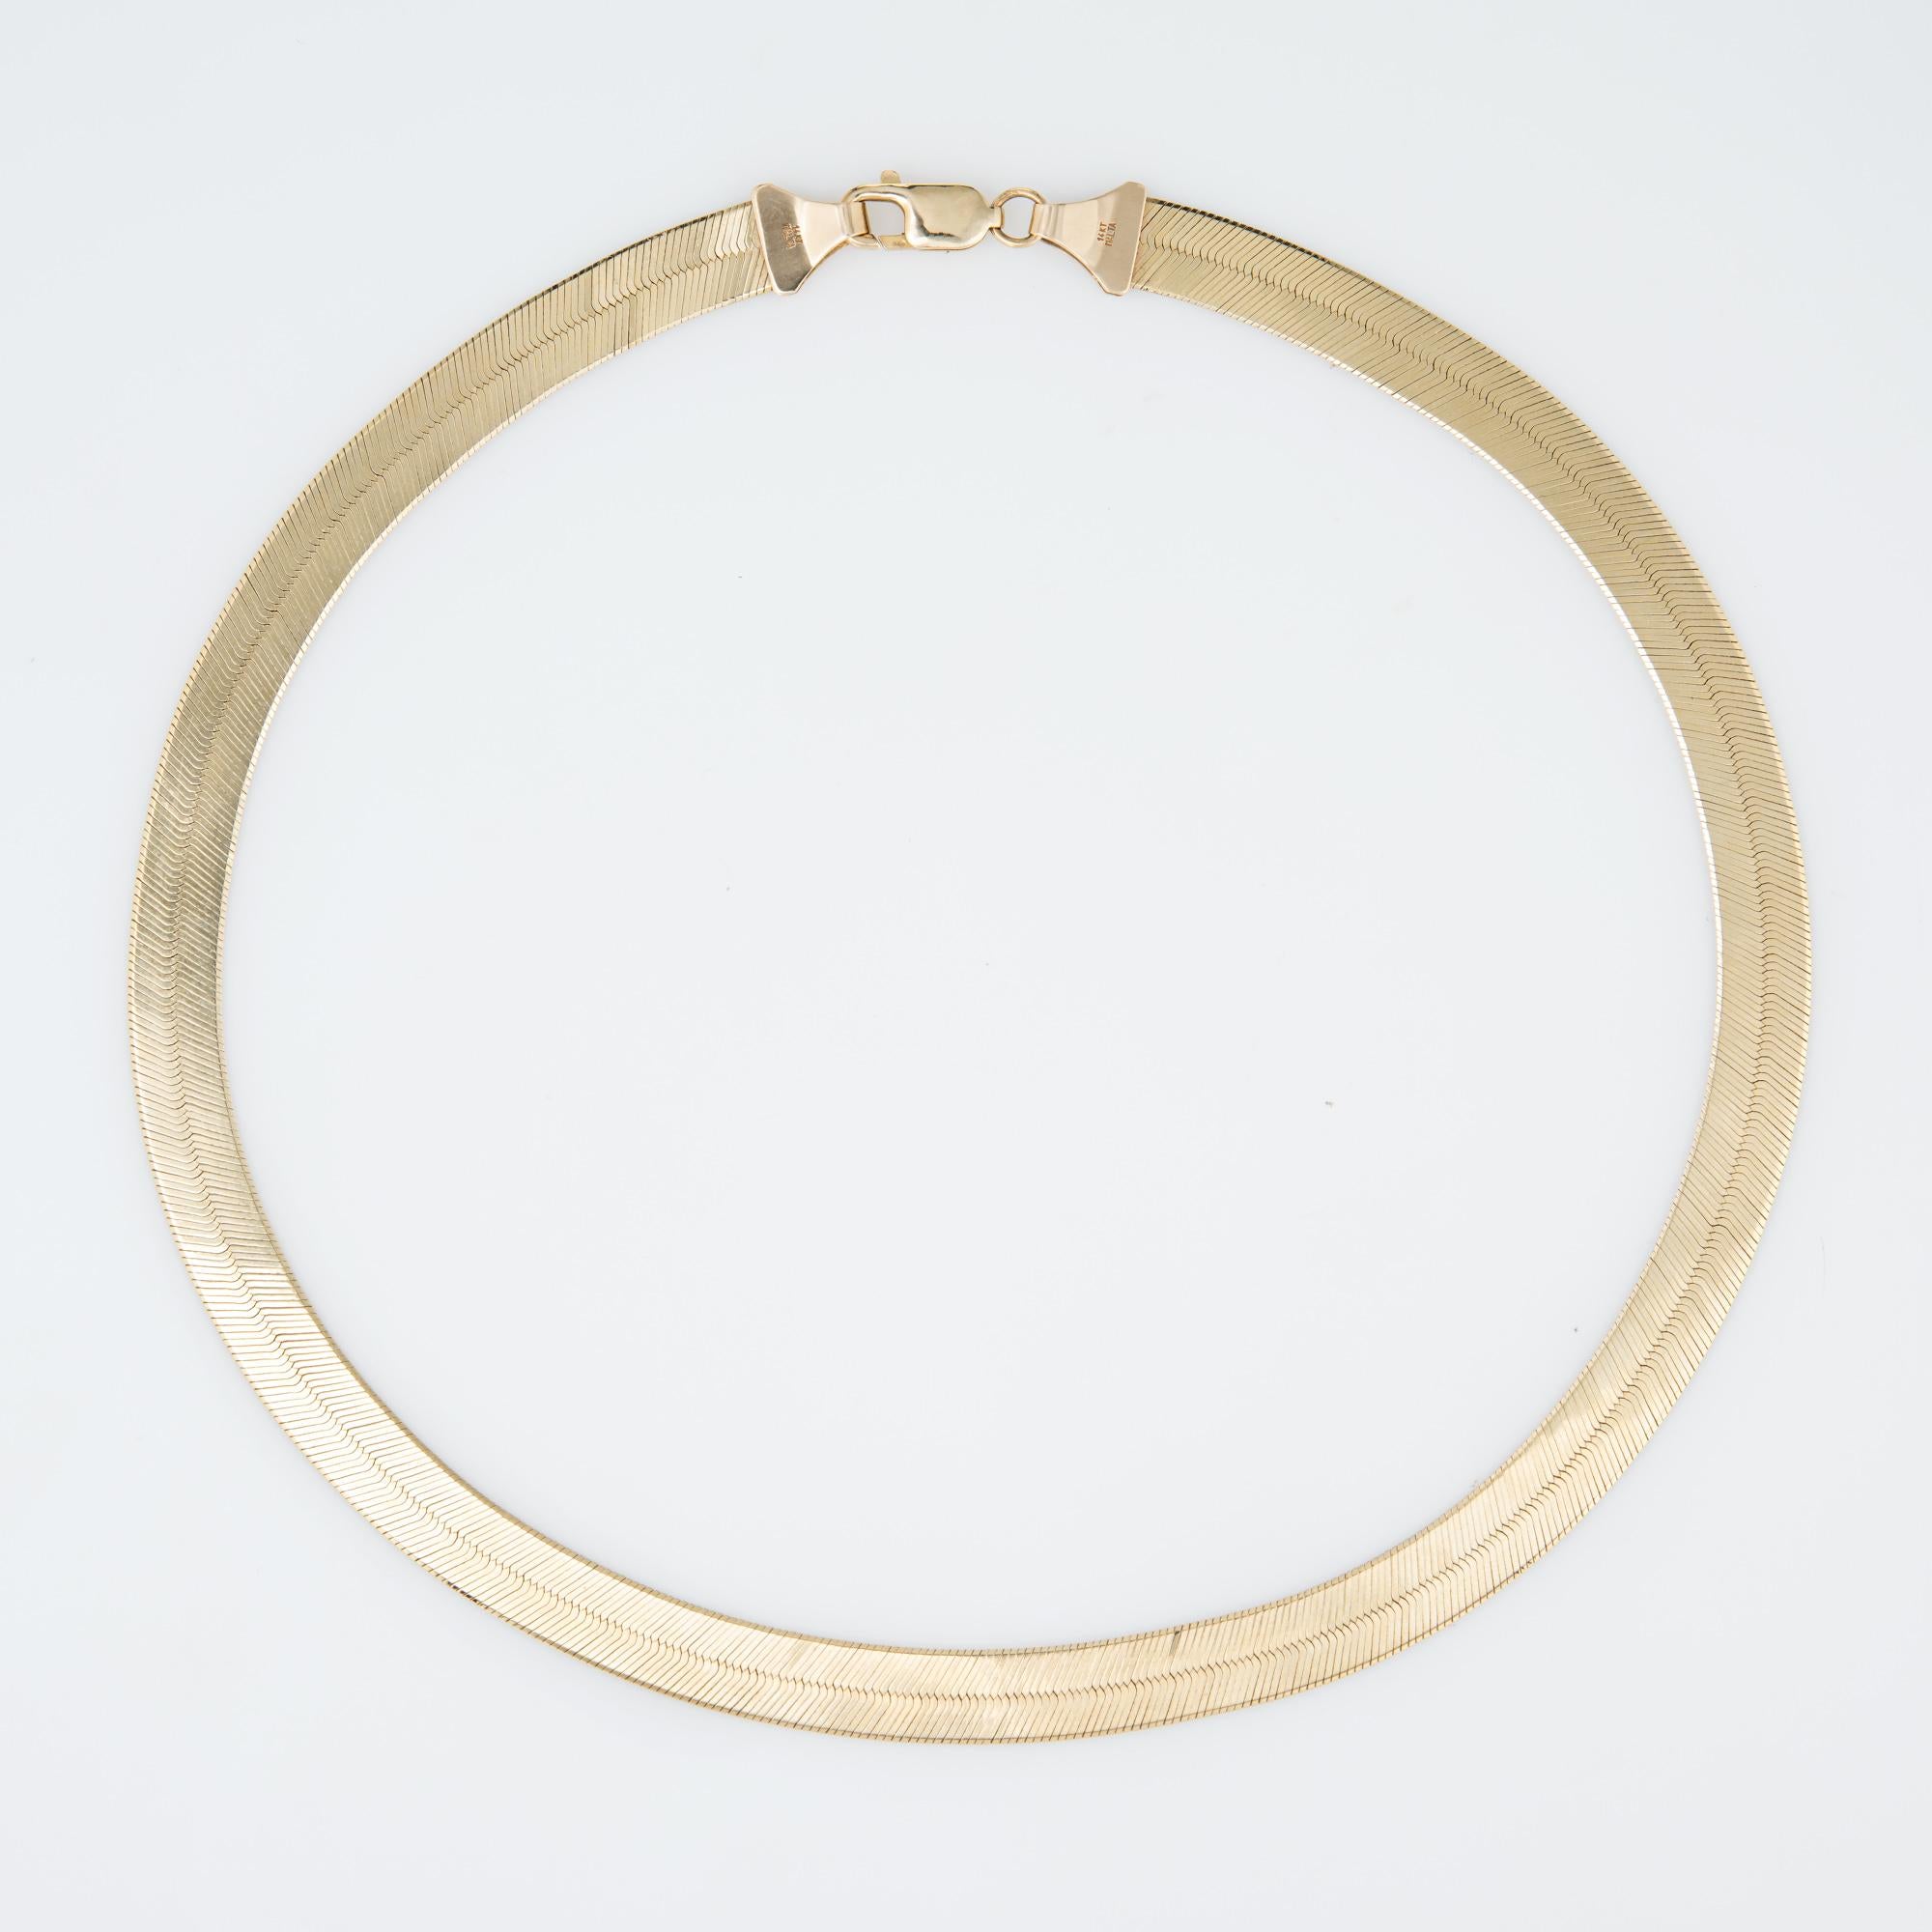 Elegant and finely detailed 14 karat yellow gold herringbone necklace (circa 1980s).  

The necklace measures 18 inches in length and sits nicely just below the nape of the neck. The necklace measures 9mm wide (0.35 inches). The necklace is great